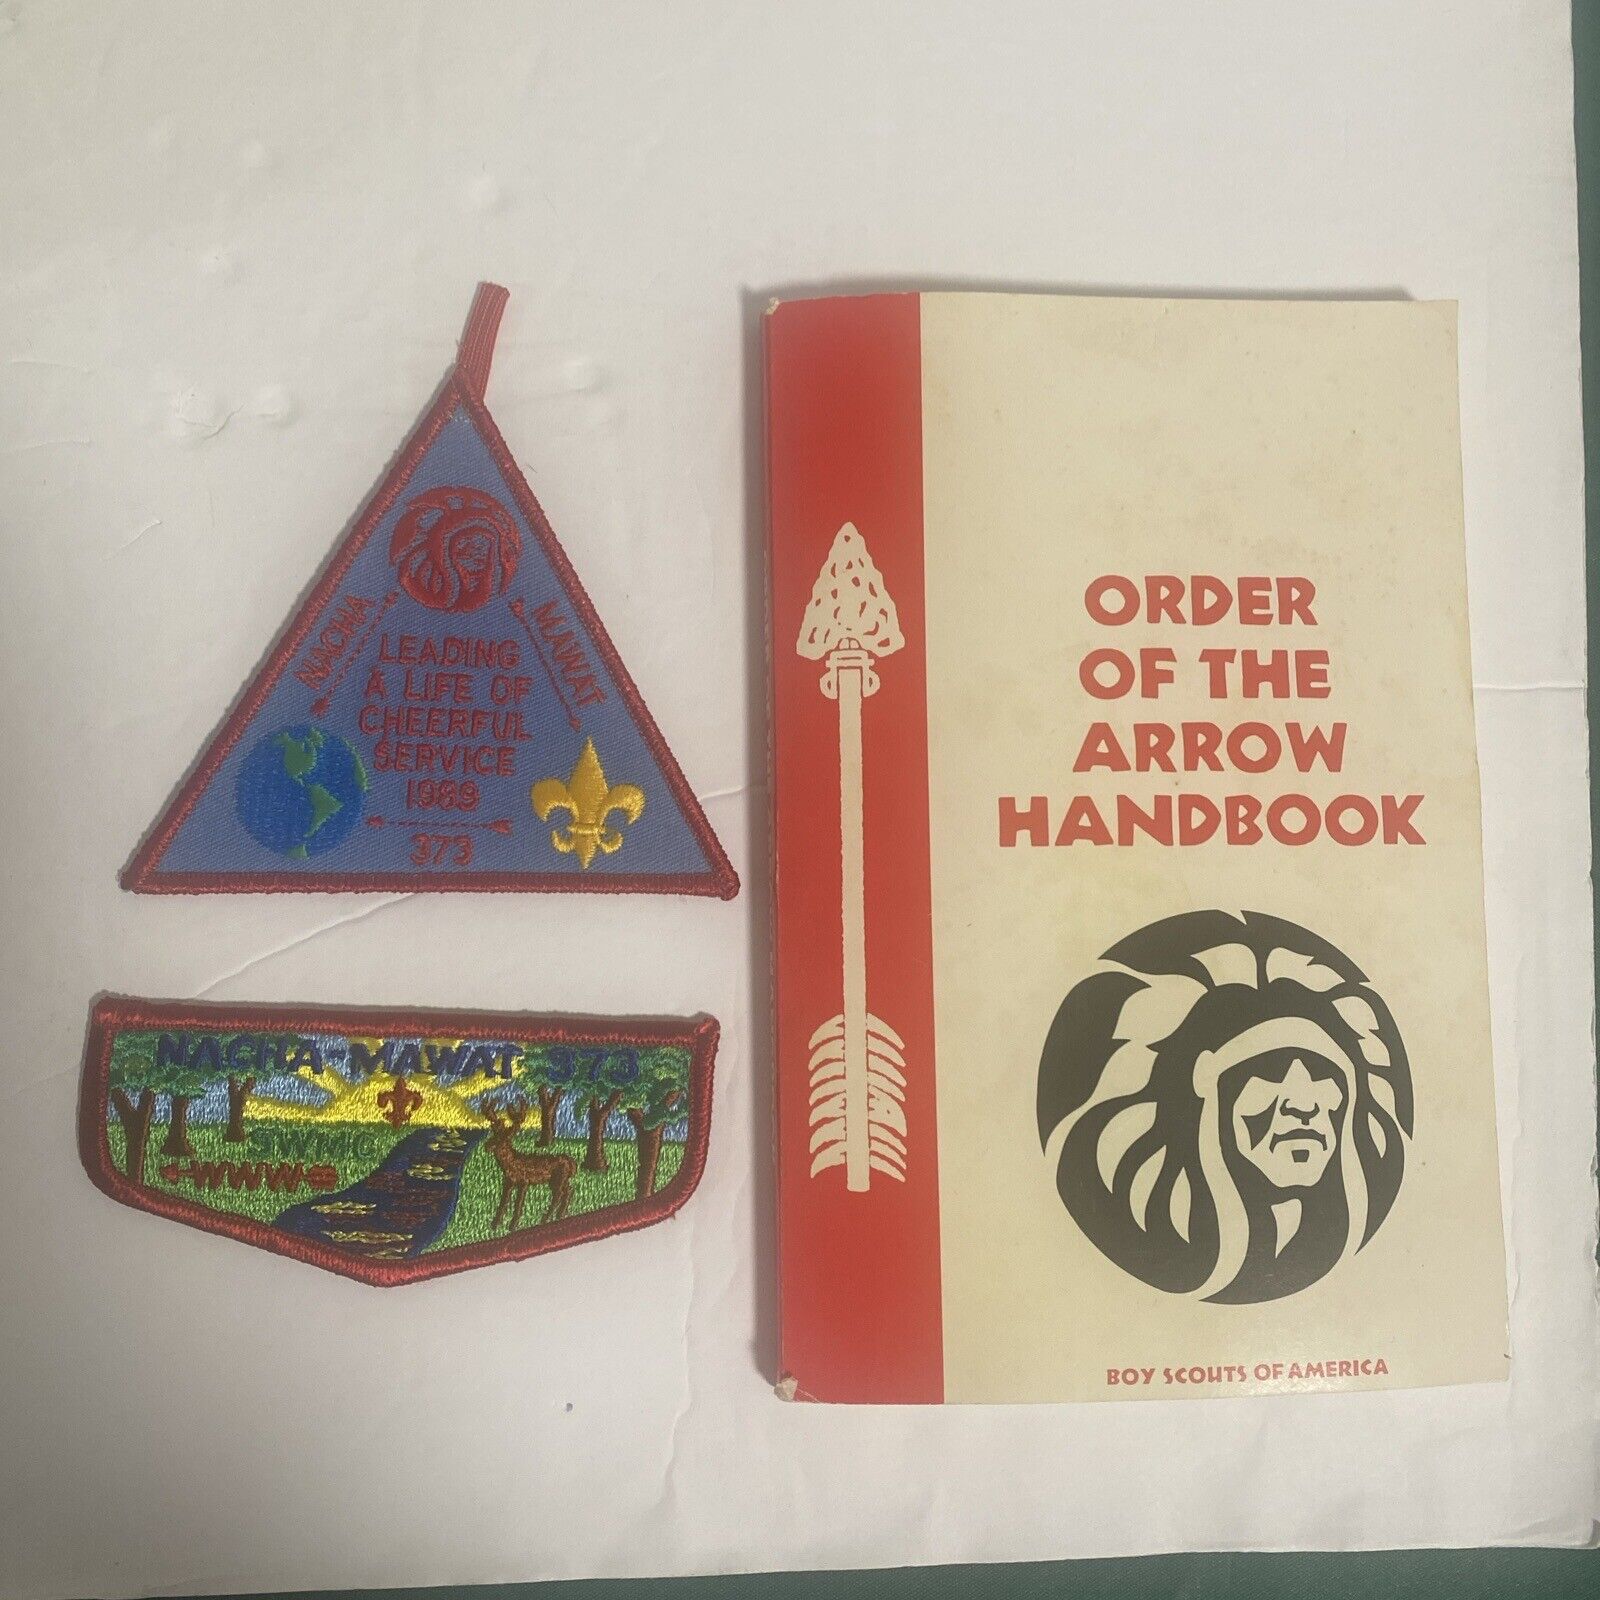 1989 Nacha Mawat LODGE 373 RED BORDER PATCHES ORDER OF THE ARROW + 87 Handbook